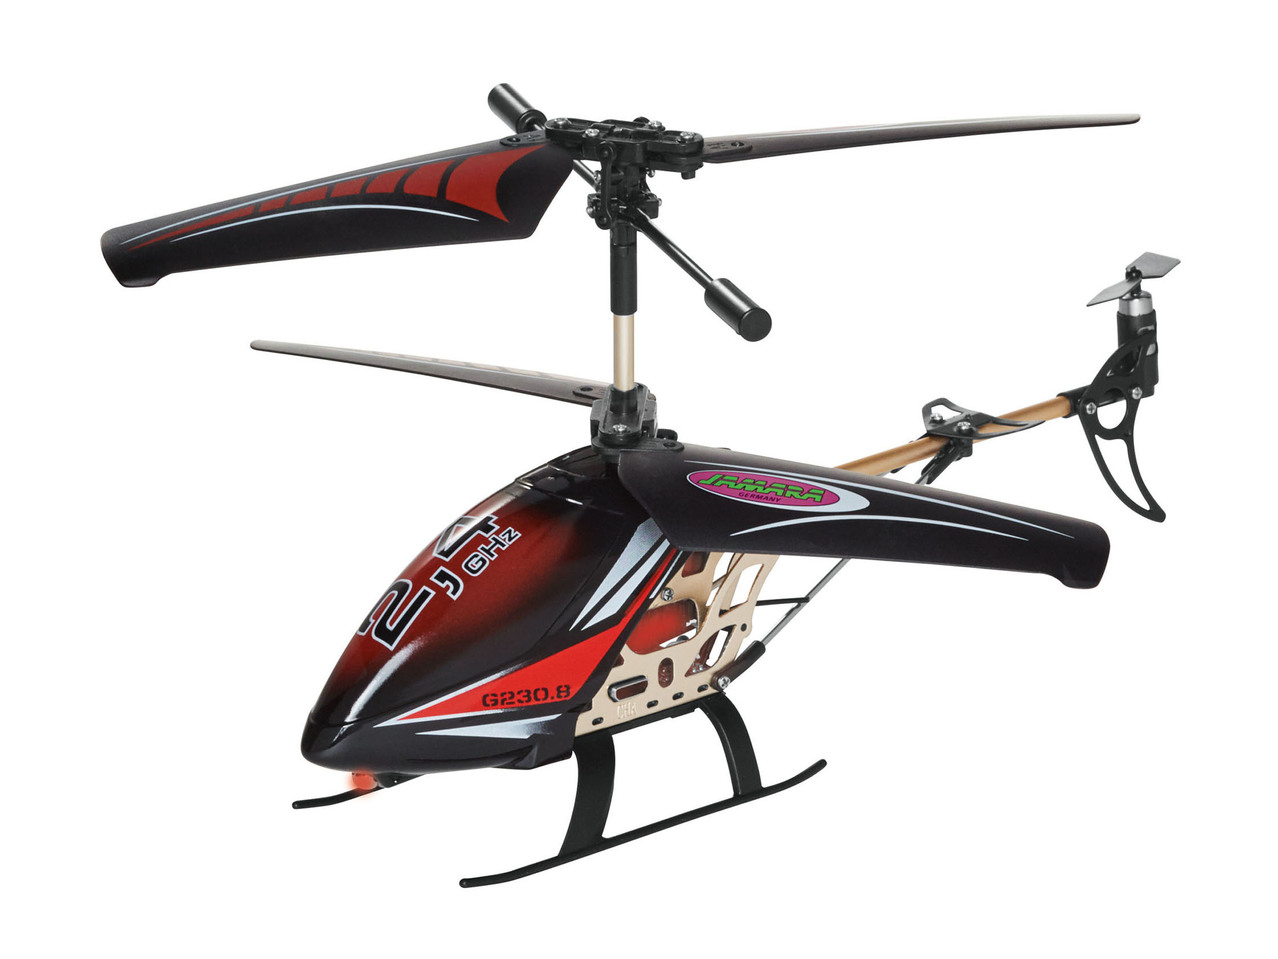 Radio-Controlled Helicopter or Drone